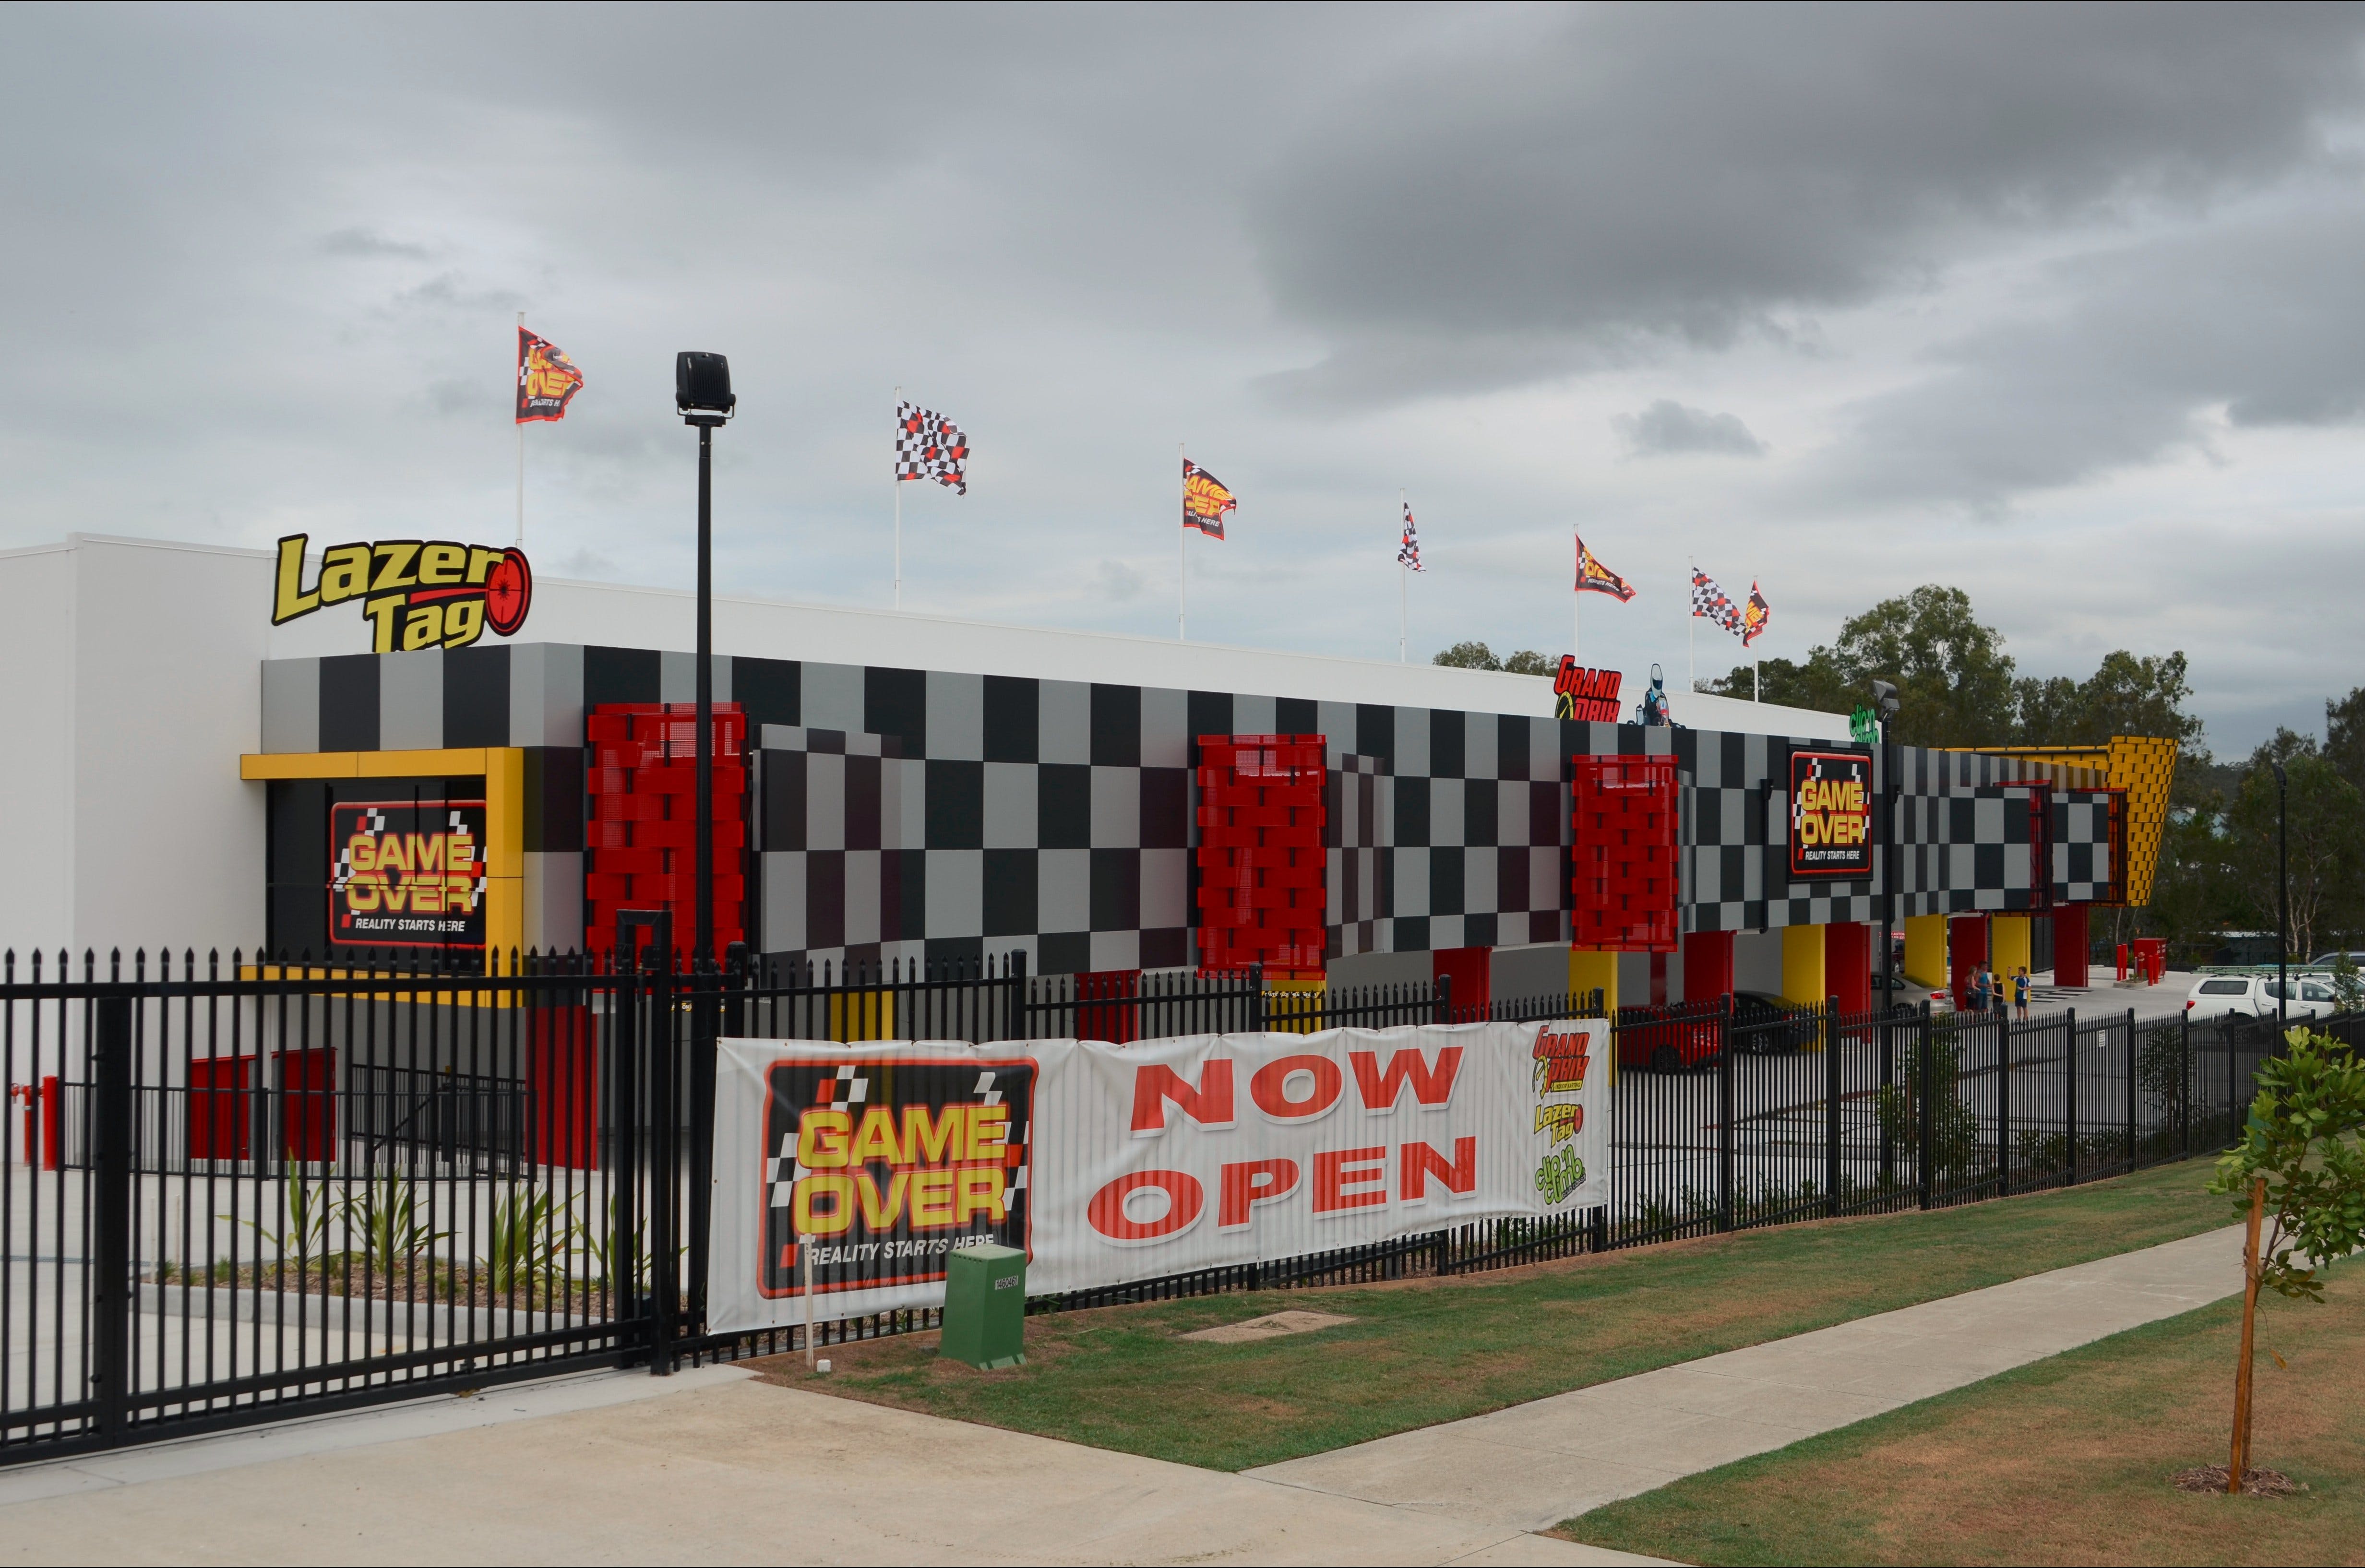 Game Over Indoor Go Karting Adventure Climbing Walls and Lazer Tag Centre - Attractions Sydney